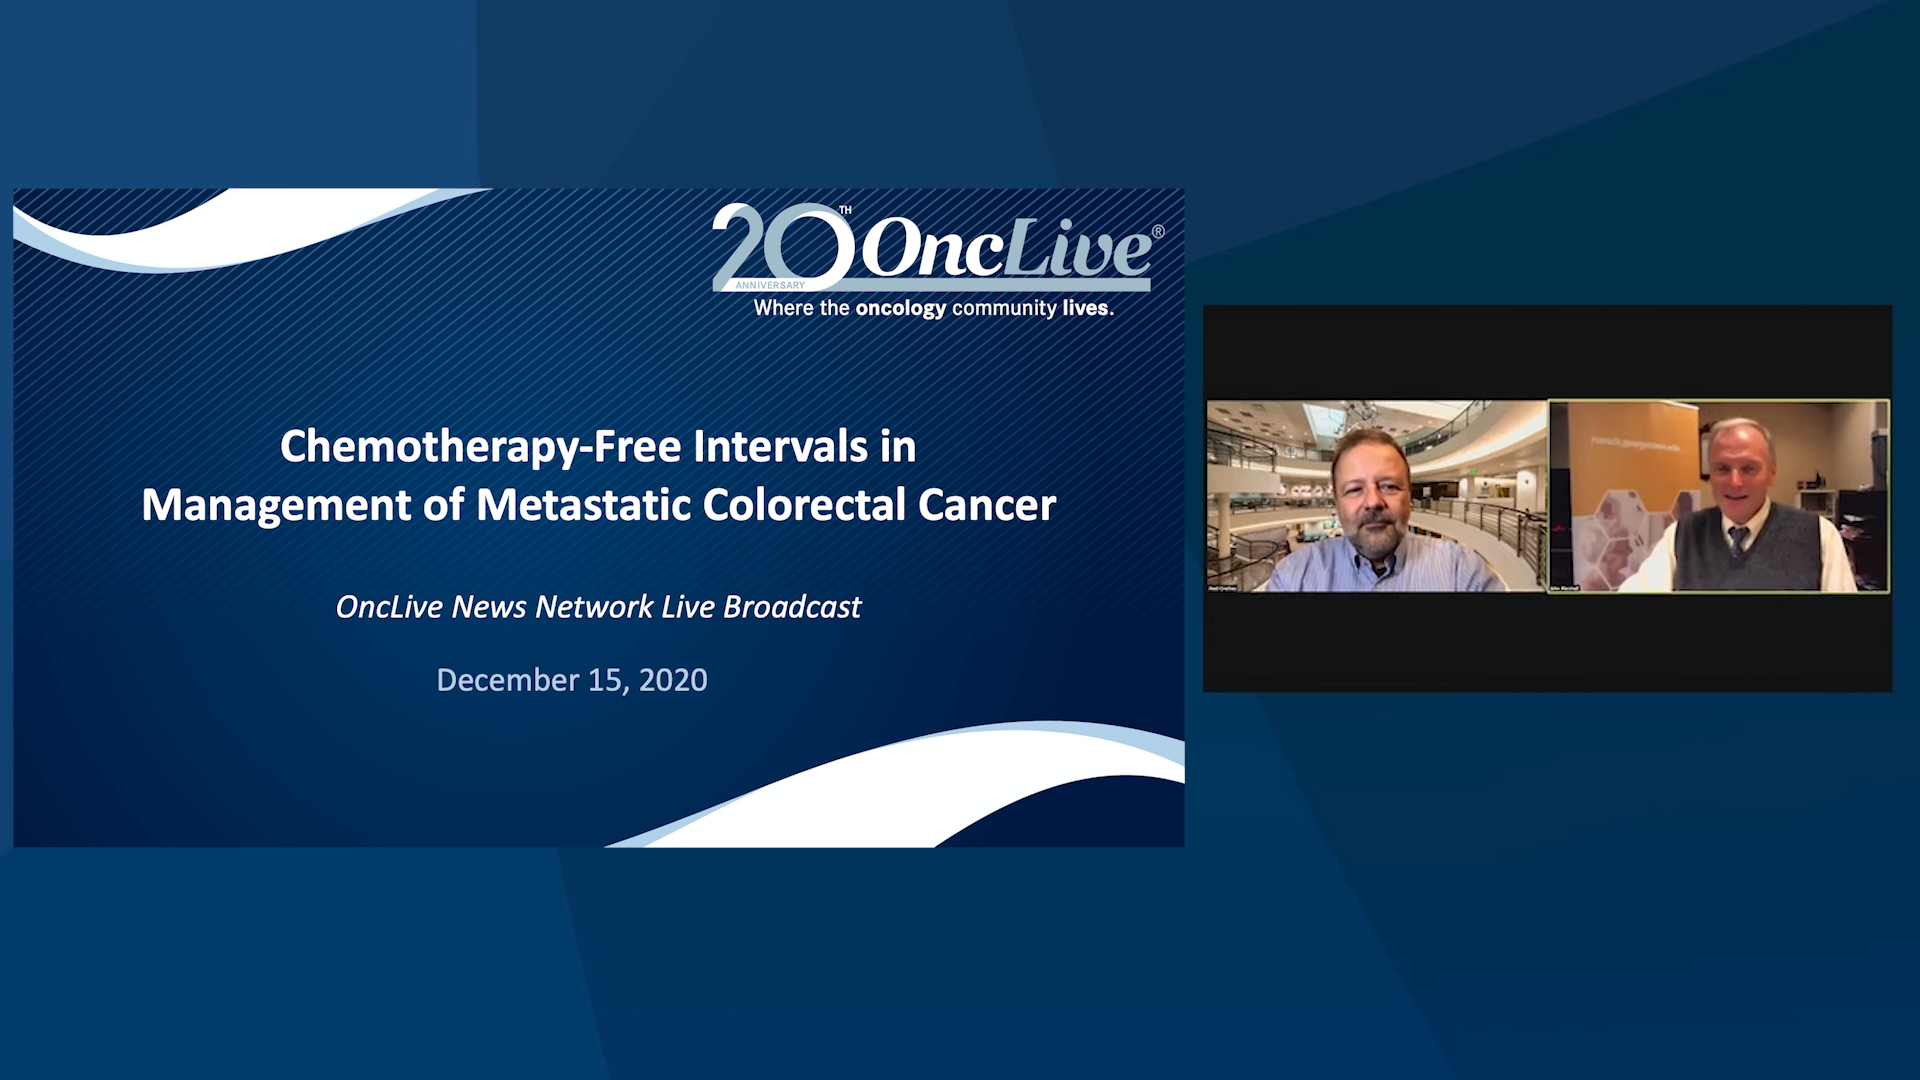 Chemotherapy-Free Intervals in Management of Metastatic Colorectal Cancer